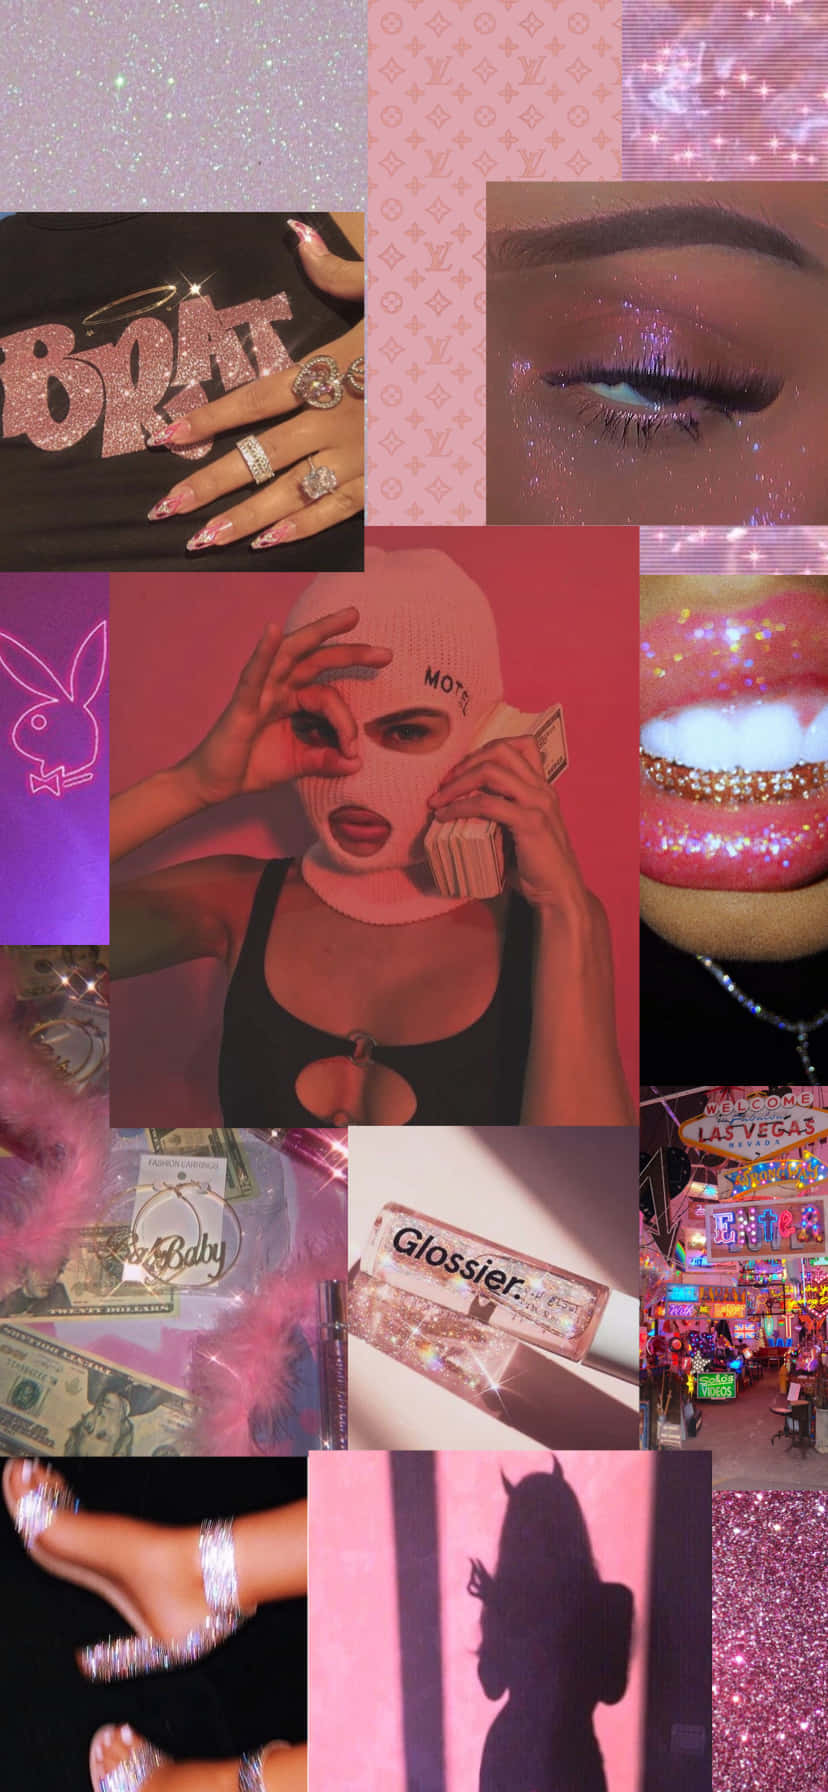 A Collage Of Pictures Of People With Pink Makeup Background